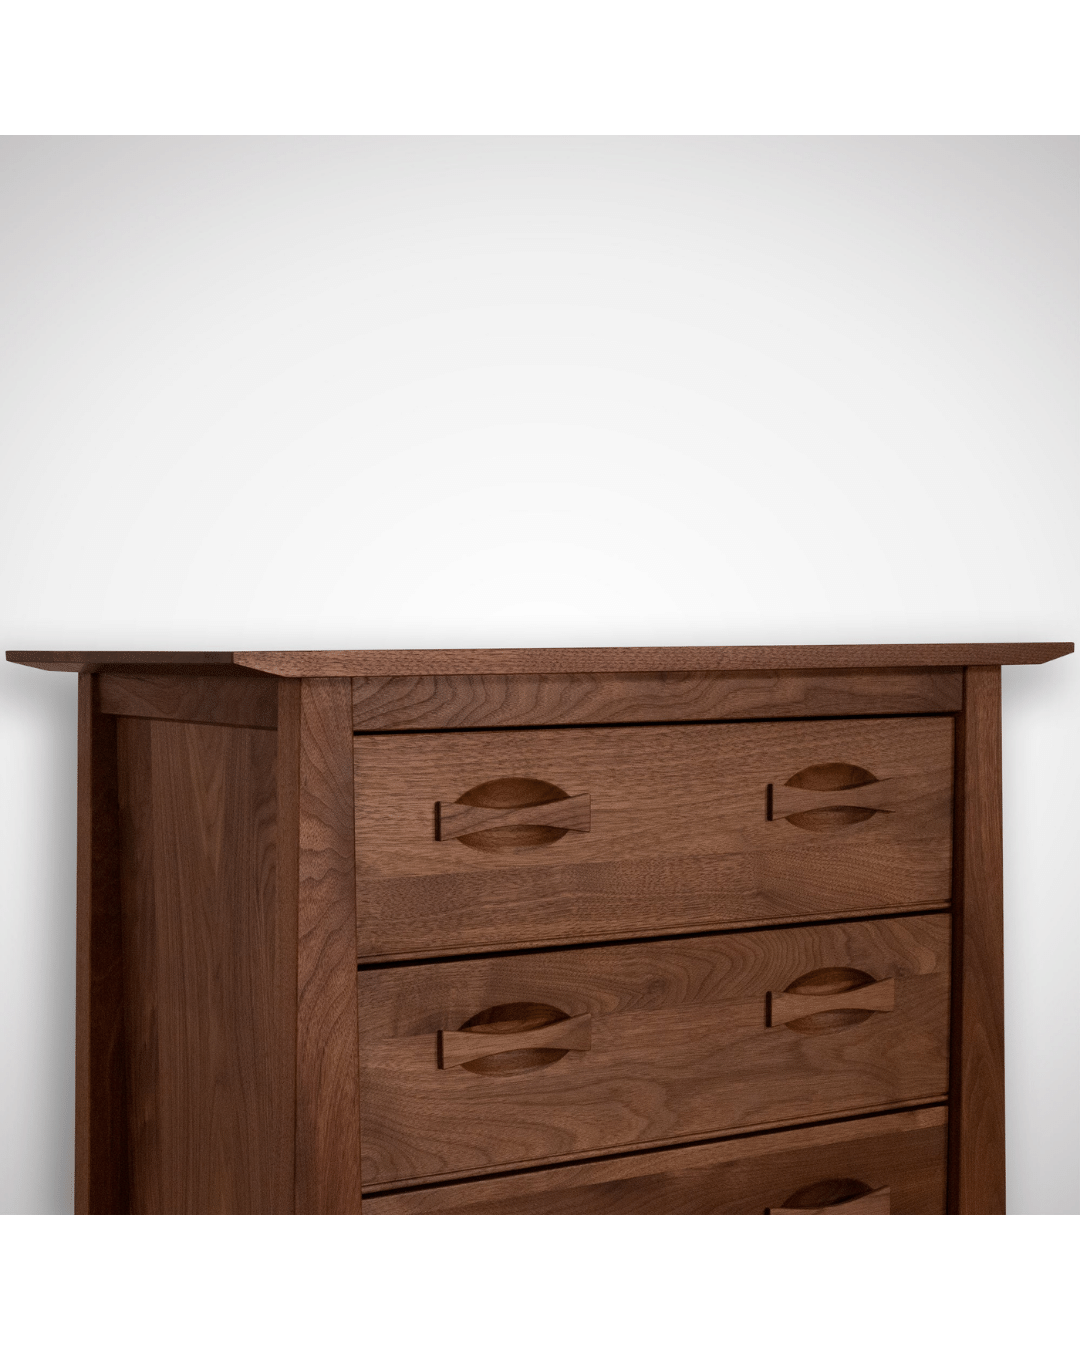 Enso Upright Dresser - Solid Wood, Handmade, and Organic